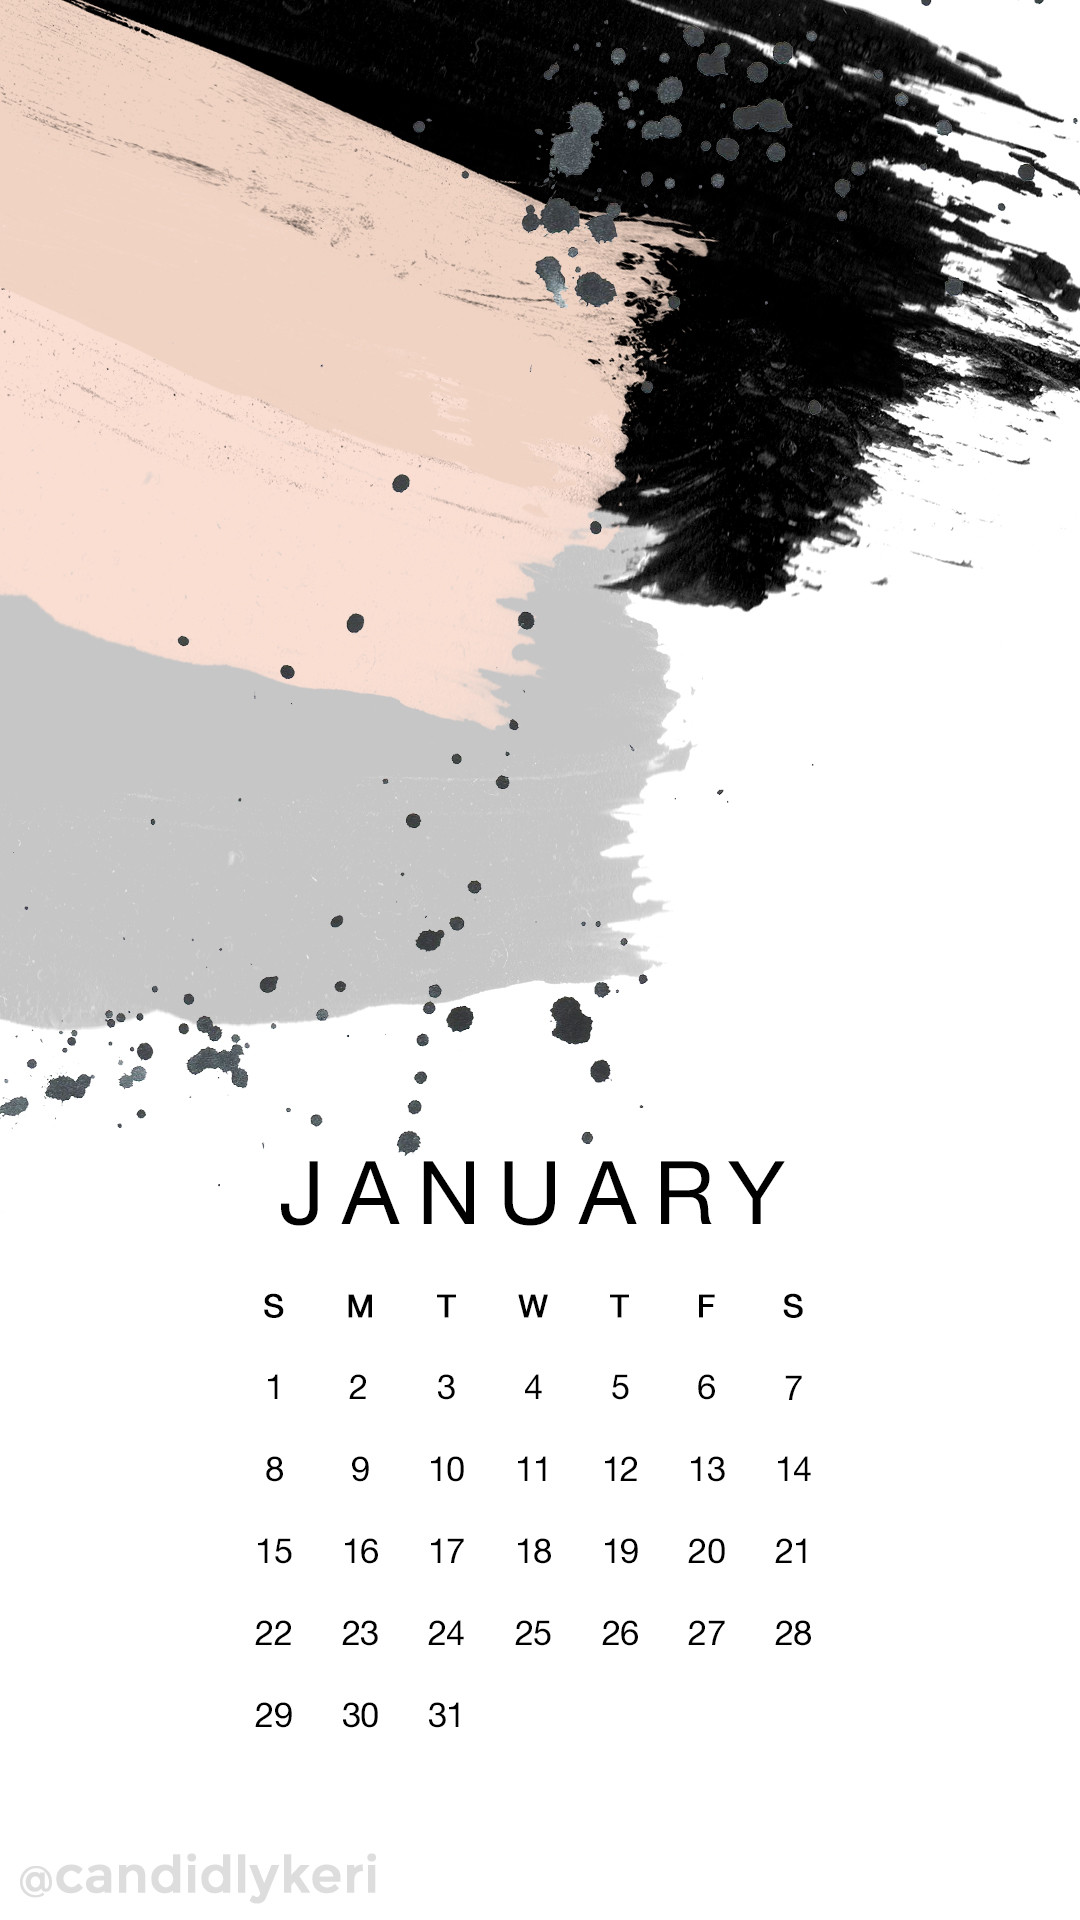 1080x1920 paint strokes black grey/gray and pink January calendar 2017 wallpaper you  can download for